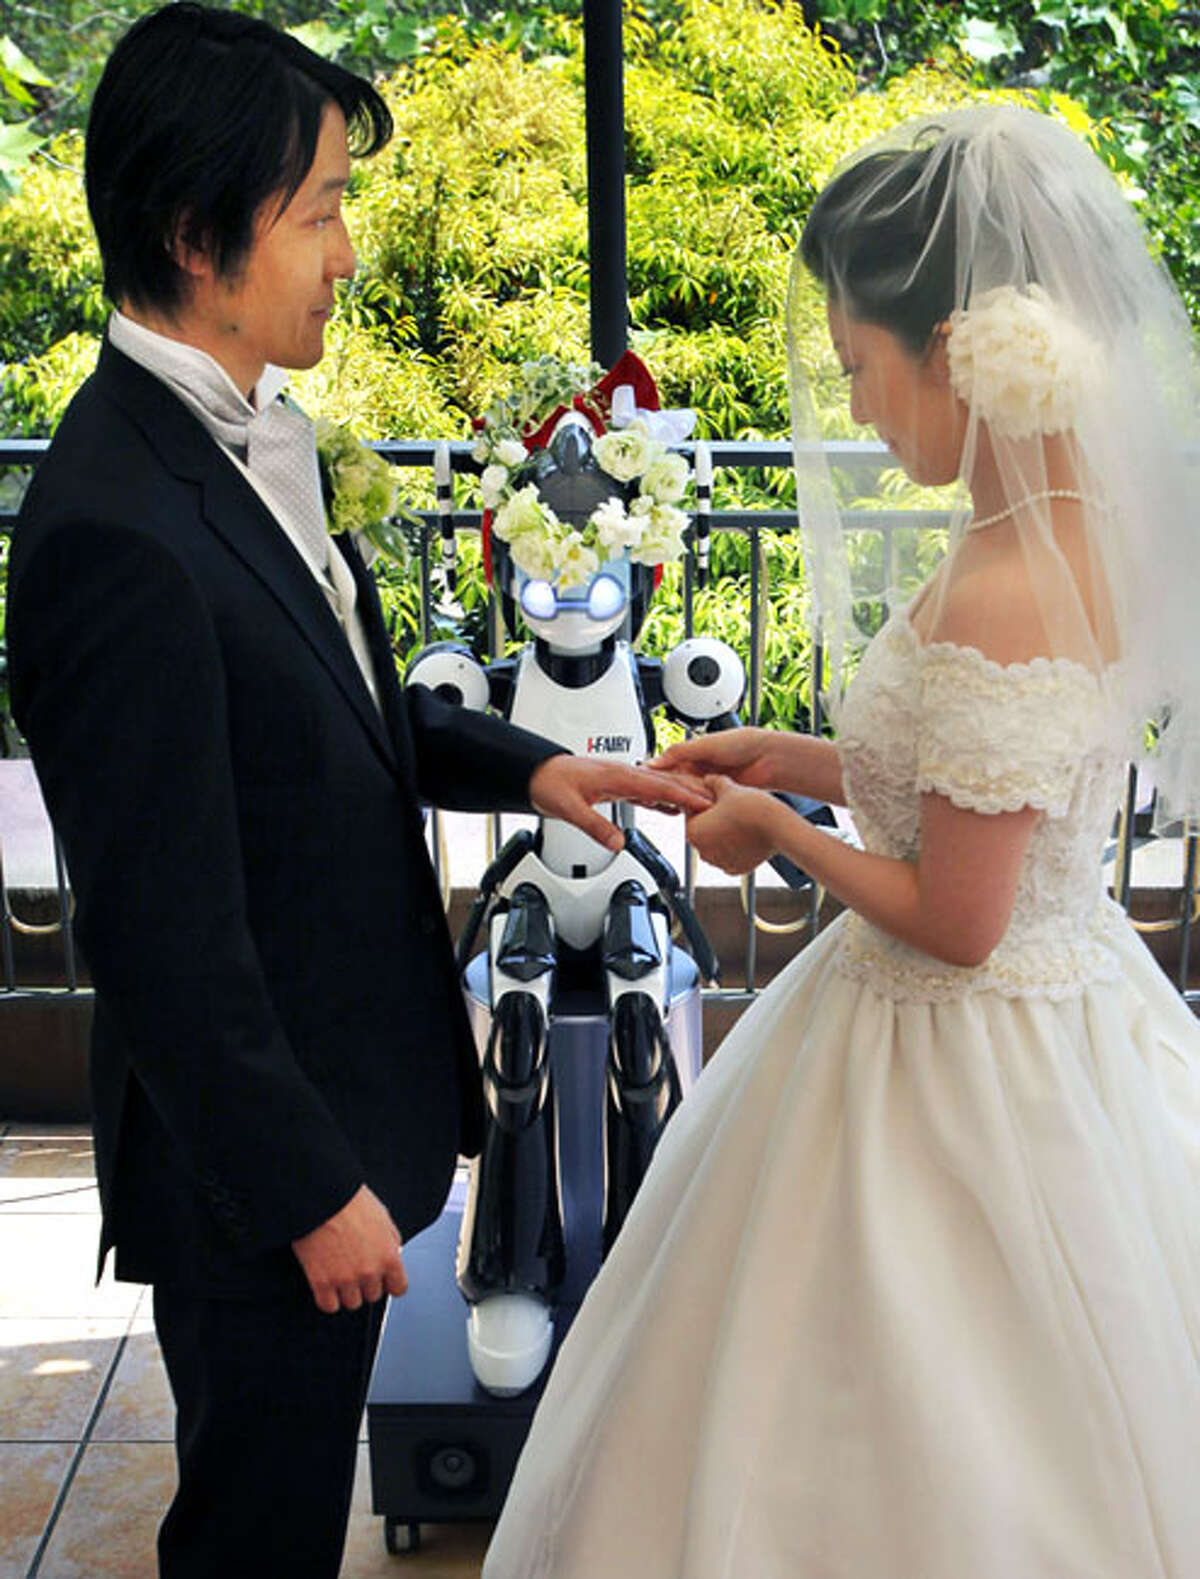 Bride Satoko Inouye, 36, puts a ring on a finger of her groom Tomohiro Shibata 42, as I-Fairy, a four-foot tall seated robot, wearing a wreath of flowers, directs their wedding ceremony at a Tokyo restaurant Sunday, May 16, 2010. The wedding was the firsttime a marriage had been led by a robot, according to manufacturer Kokoro Co.